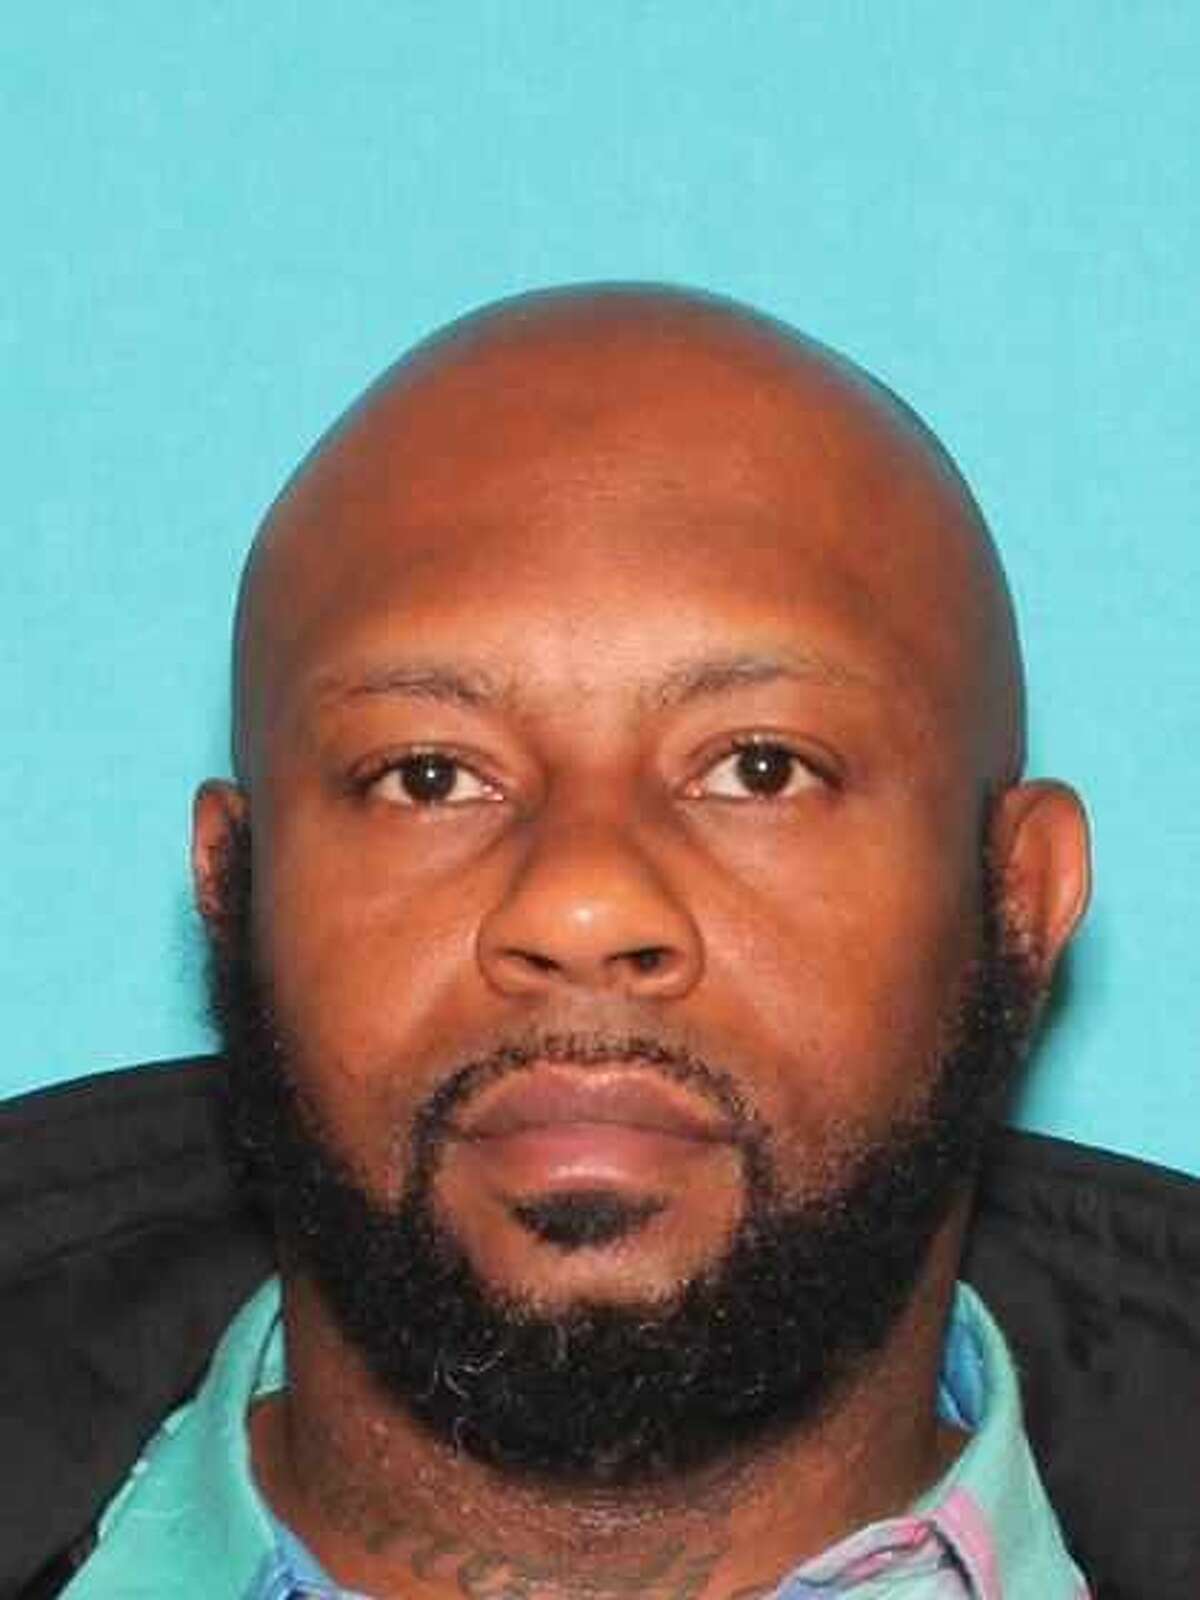 Kendrick Akins, 39, was charged in the shooting death of his fiancee, three days after his proposal.